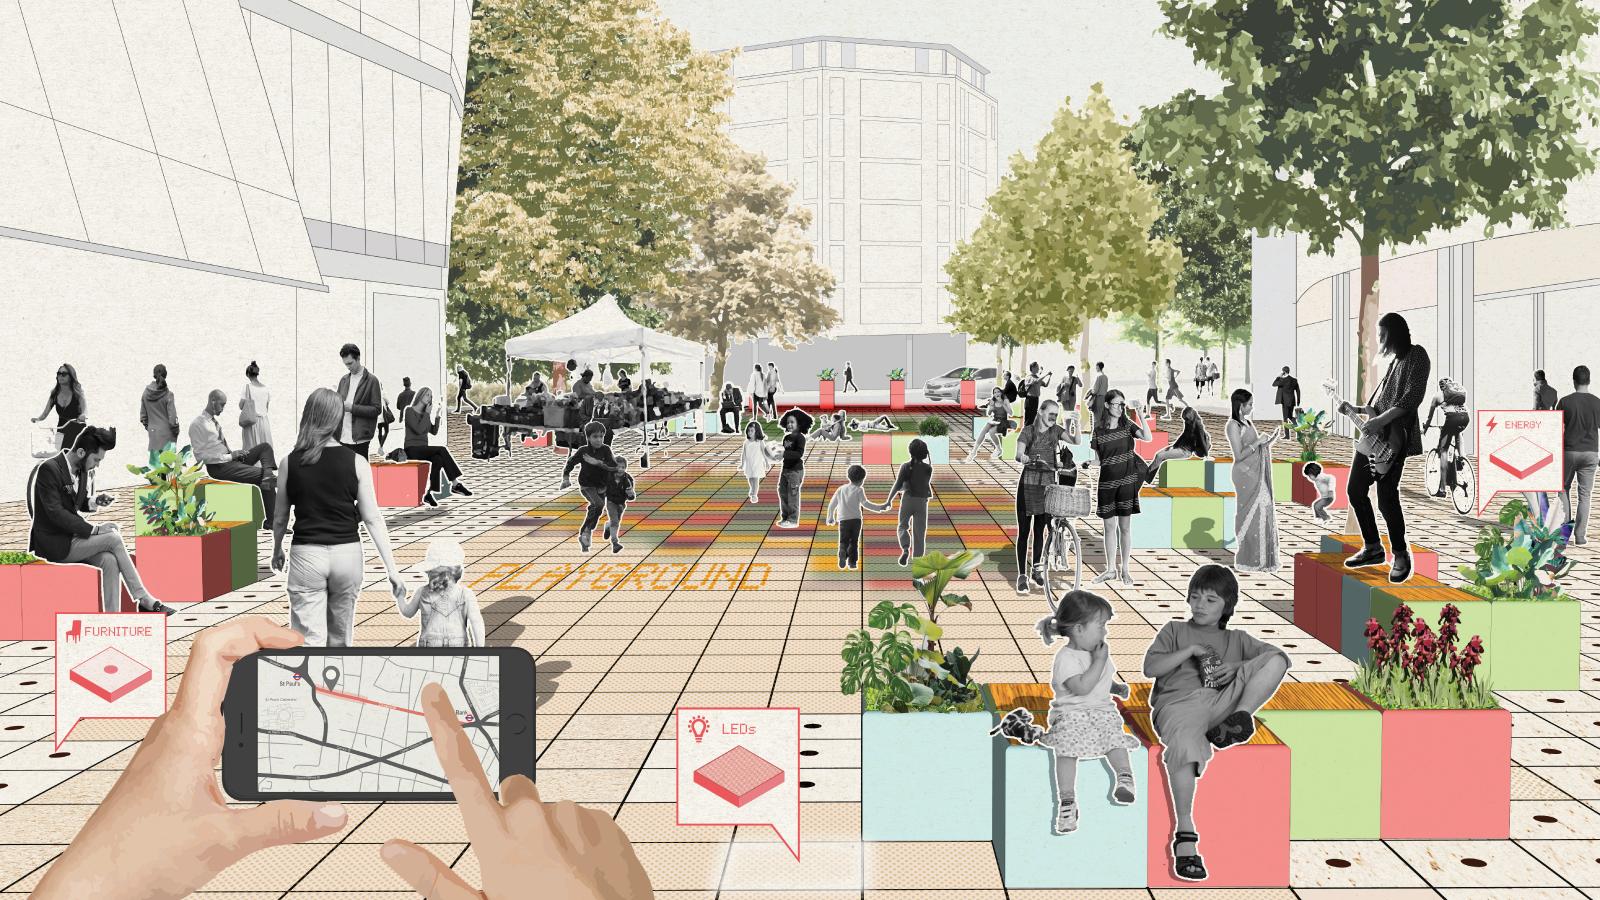 A bustling urban square is filled with people engaging in various activities. Some are seated on colorful blocks, others are walking or standing. Trees provide shade, and a person in the foreground holds a smartphone displaying a map. Several plants decorate the area, complementing the innovative smart carpet pathways.